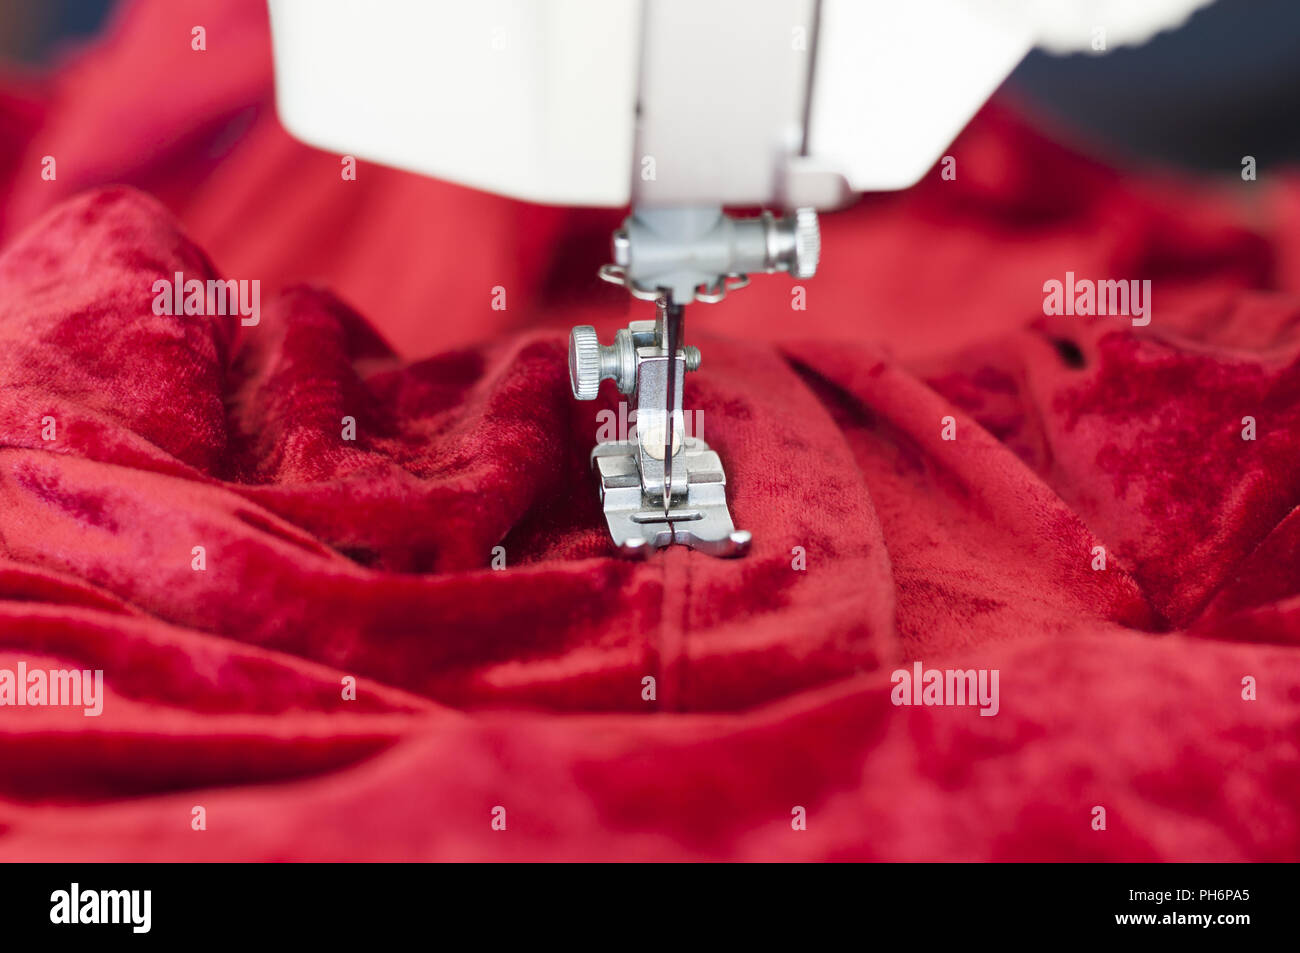 Sewing machine with textiles Stock Photo